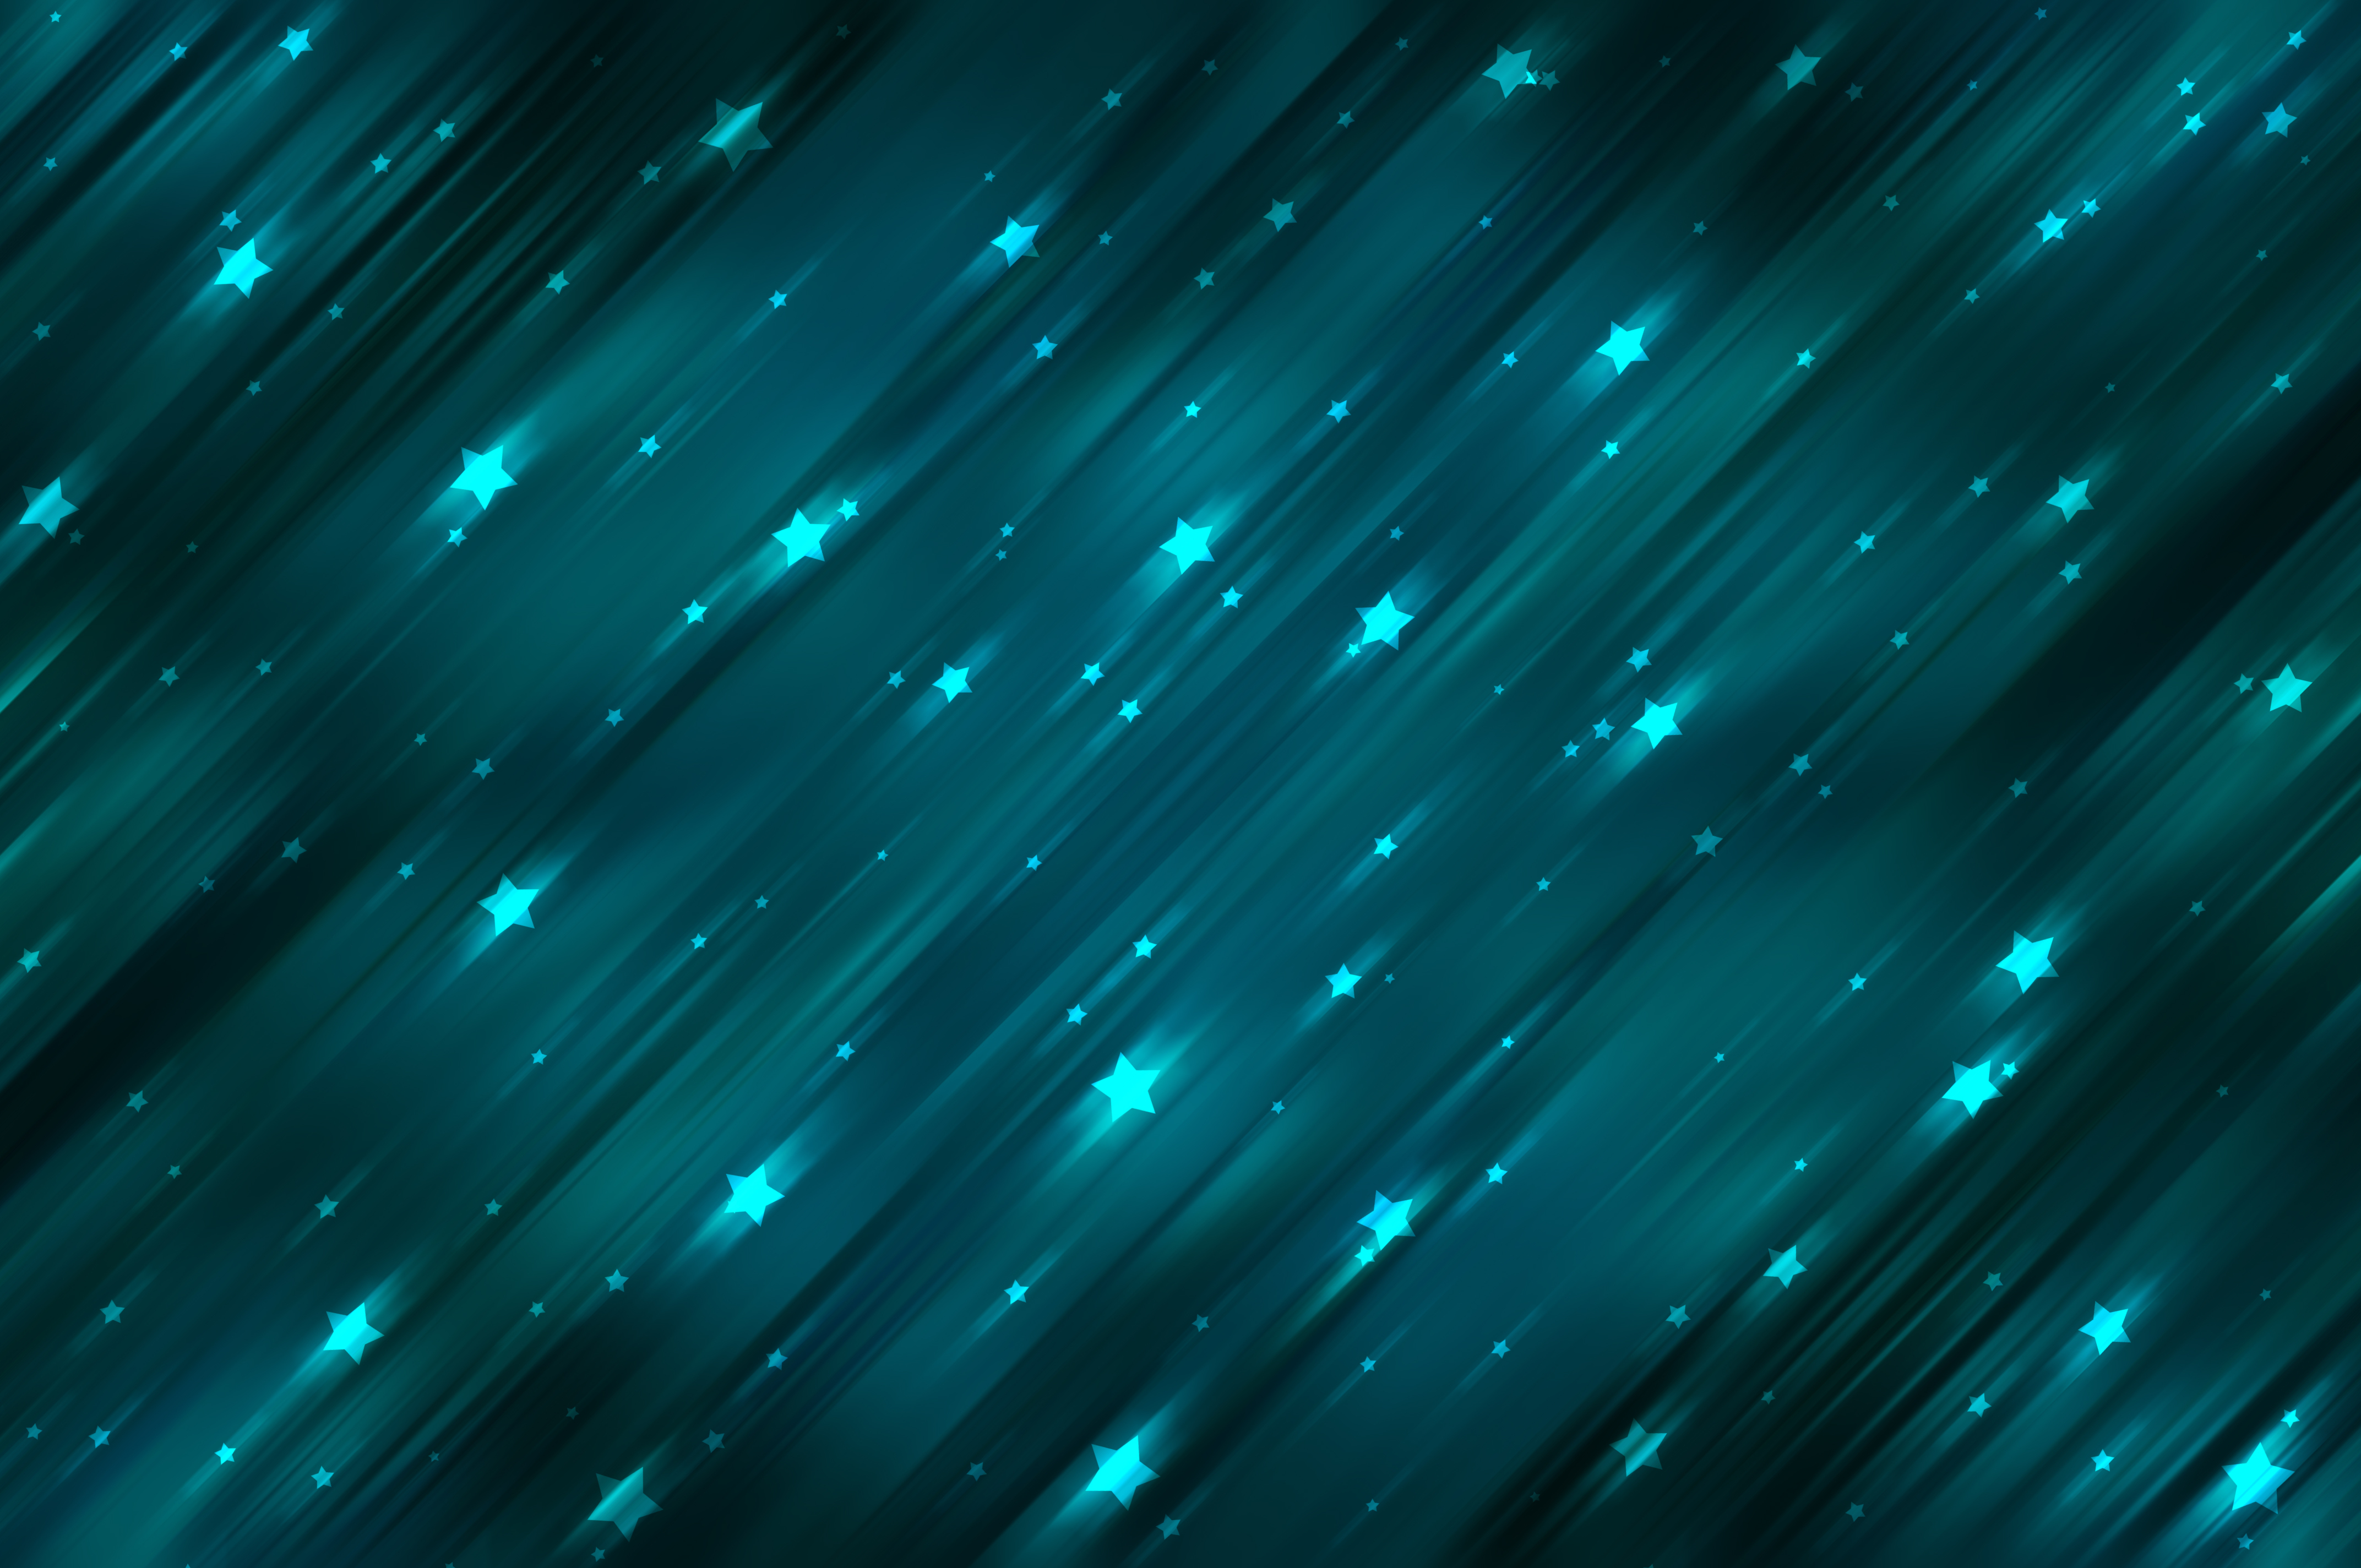 General 4288x2848 abstract illustration lights stars lines pattern blue green space turquoise